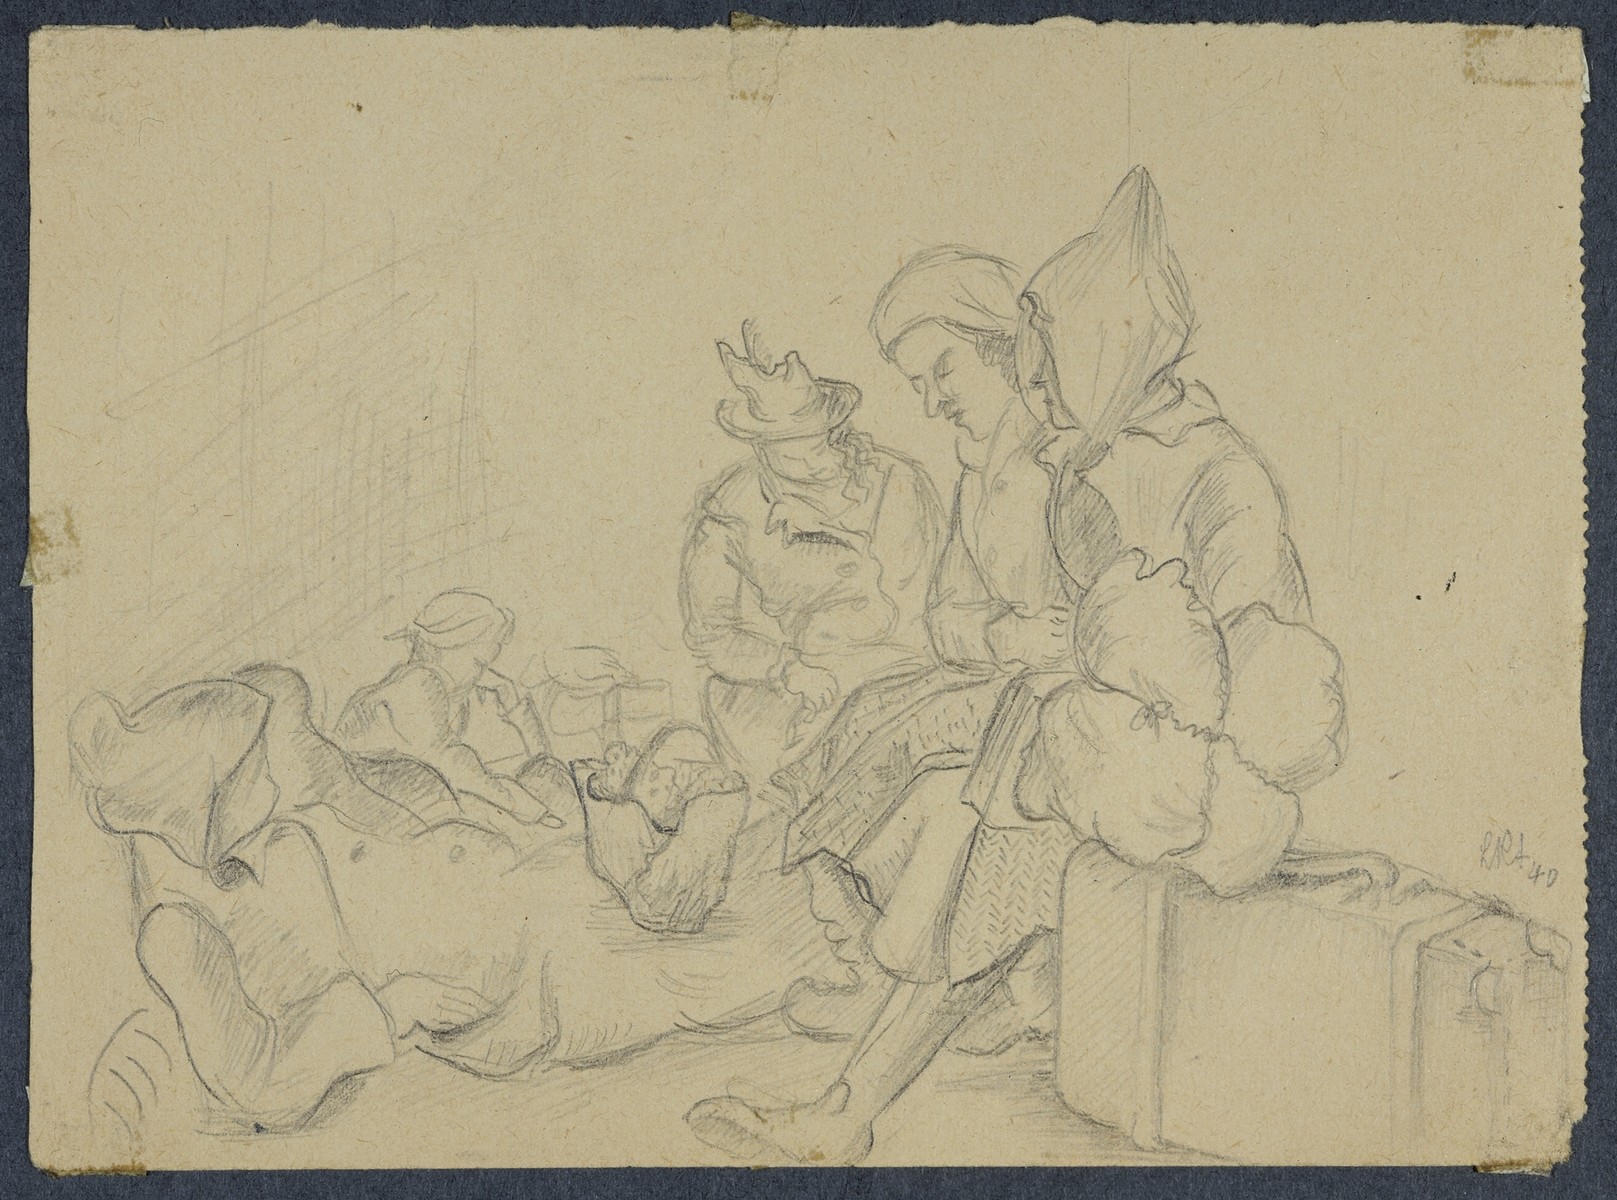 "Waiting for Deportation (VersionII)" by Lili Andrieux.  Sketch of women sitting on suitcases and on the ground with bags and a basket.